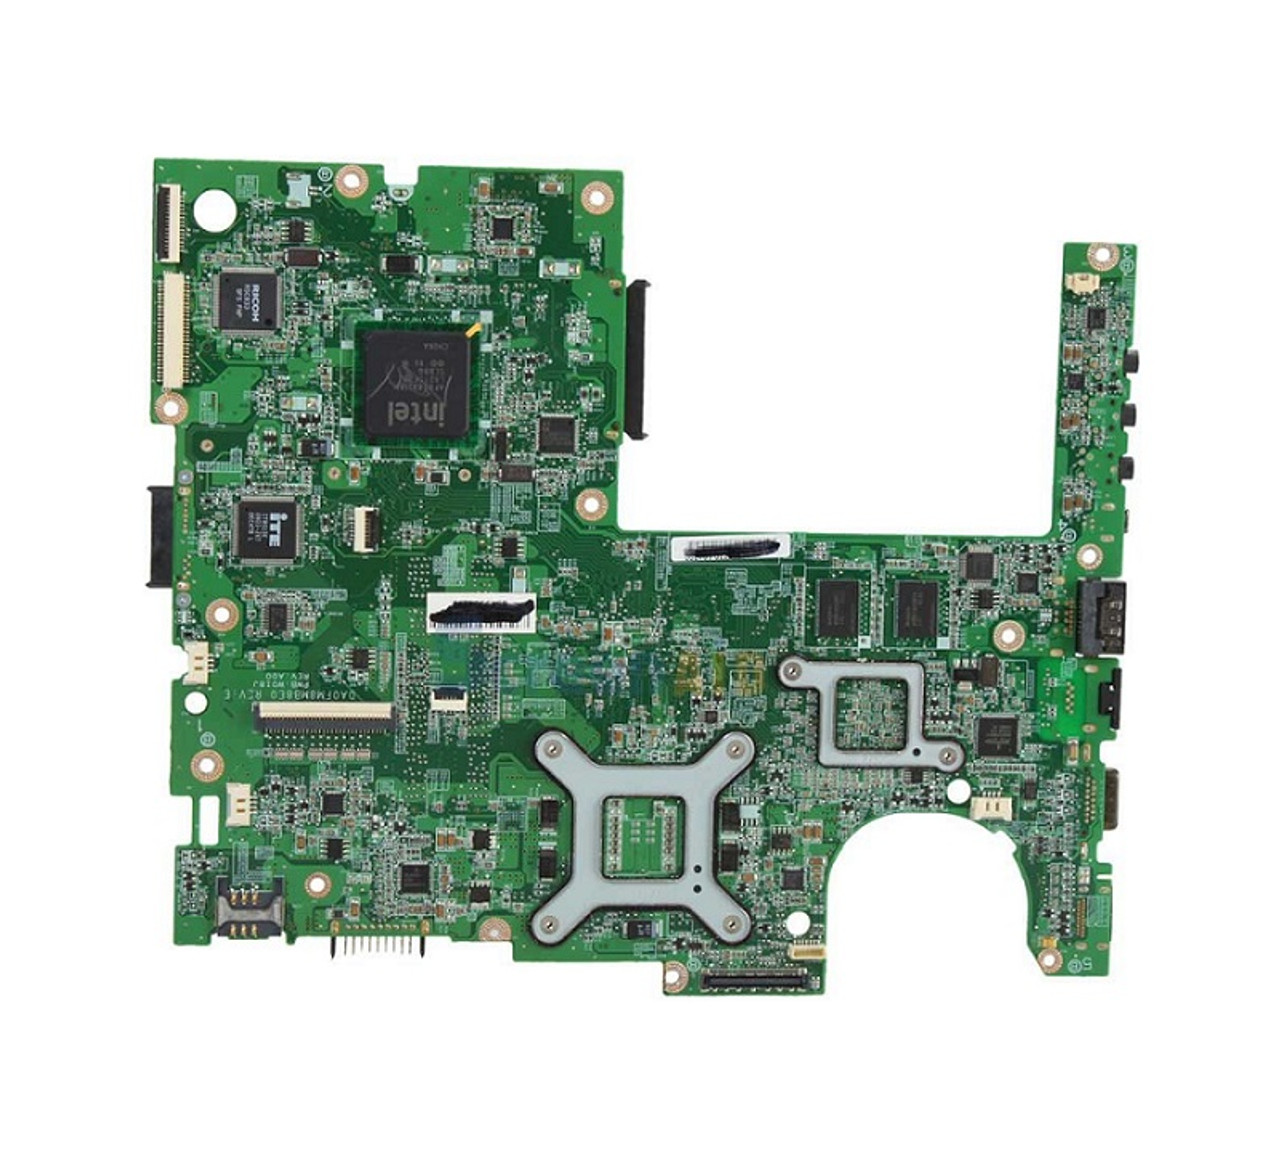 60-N4OMB1901-B04 - Asus X401u Laptop Motheboard with AMD E2-1800 1.7GHz Cpu